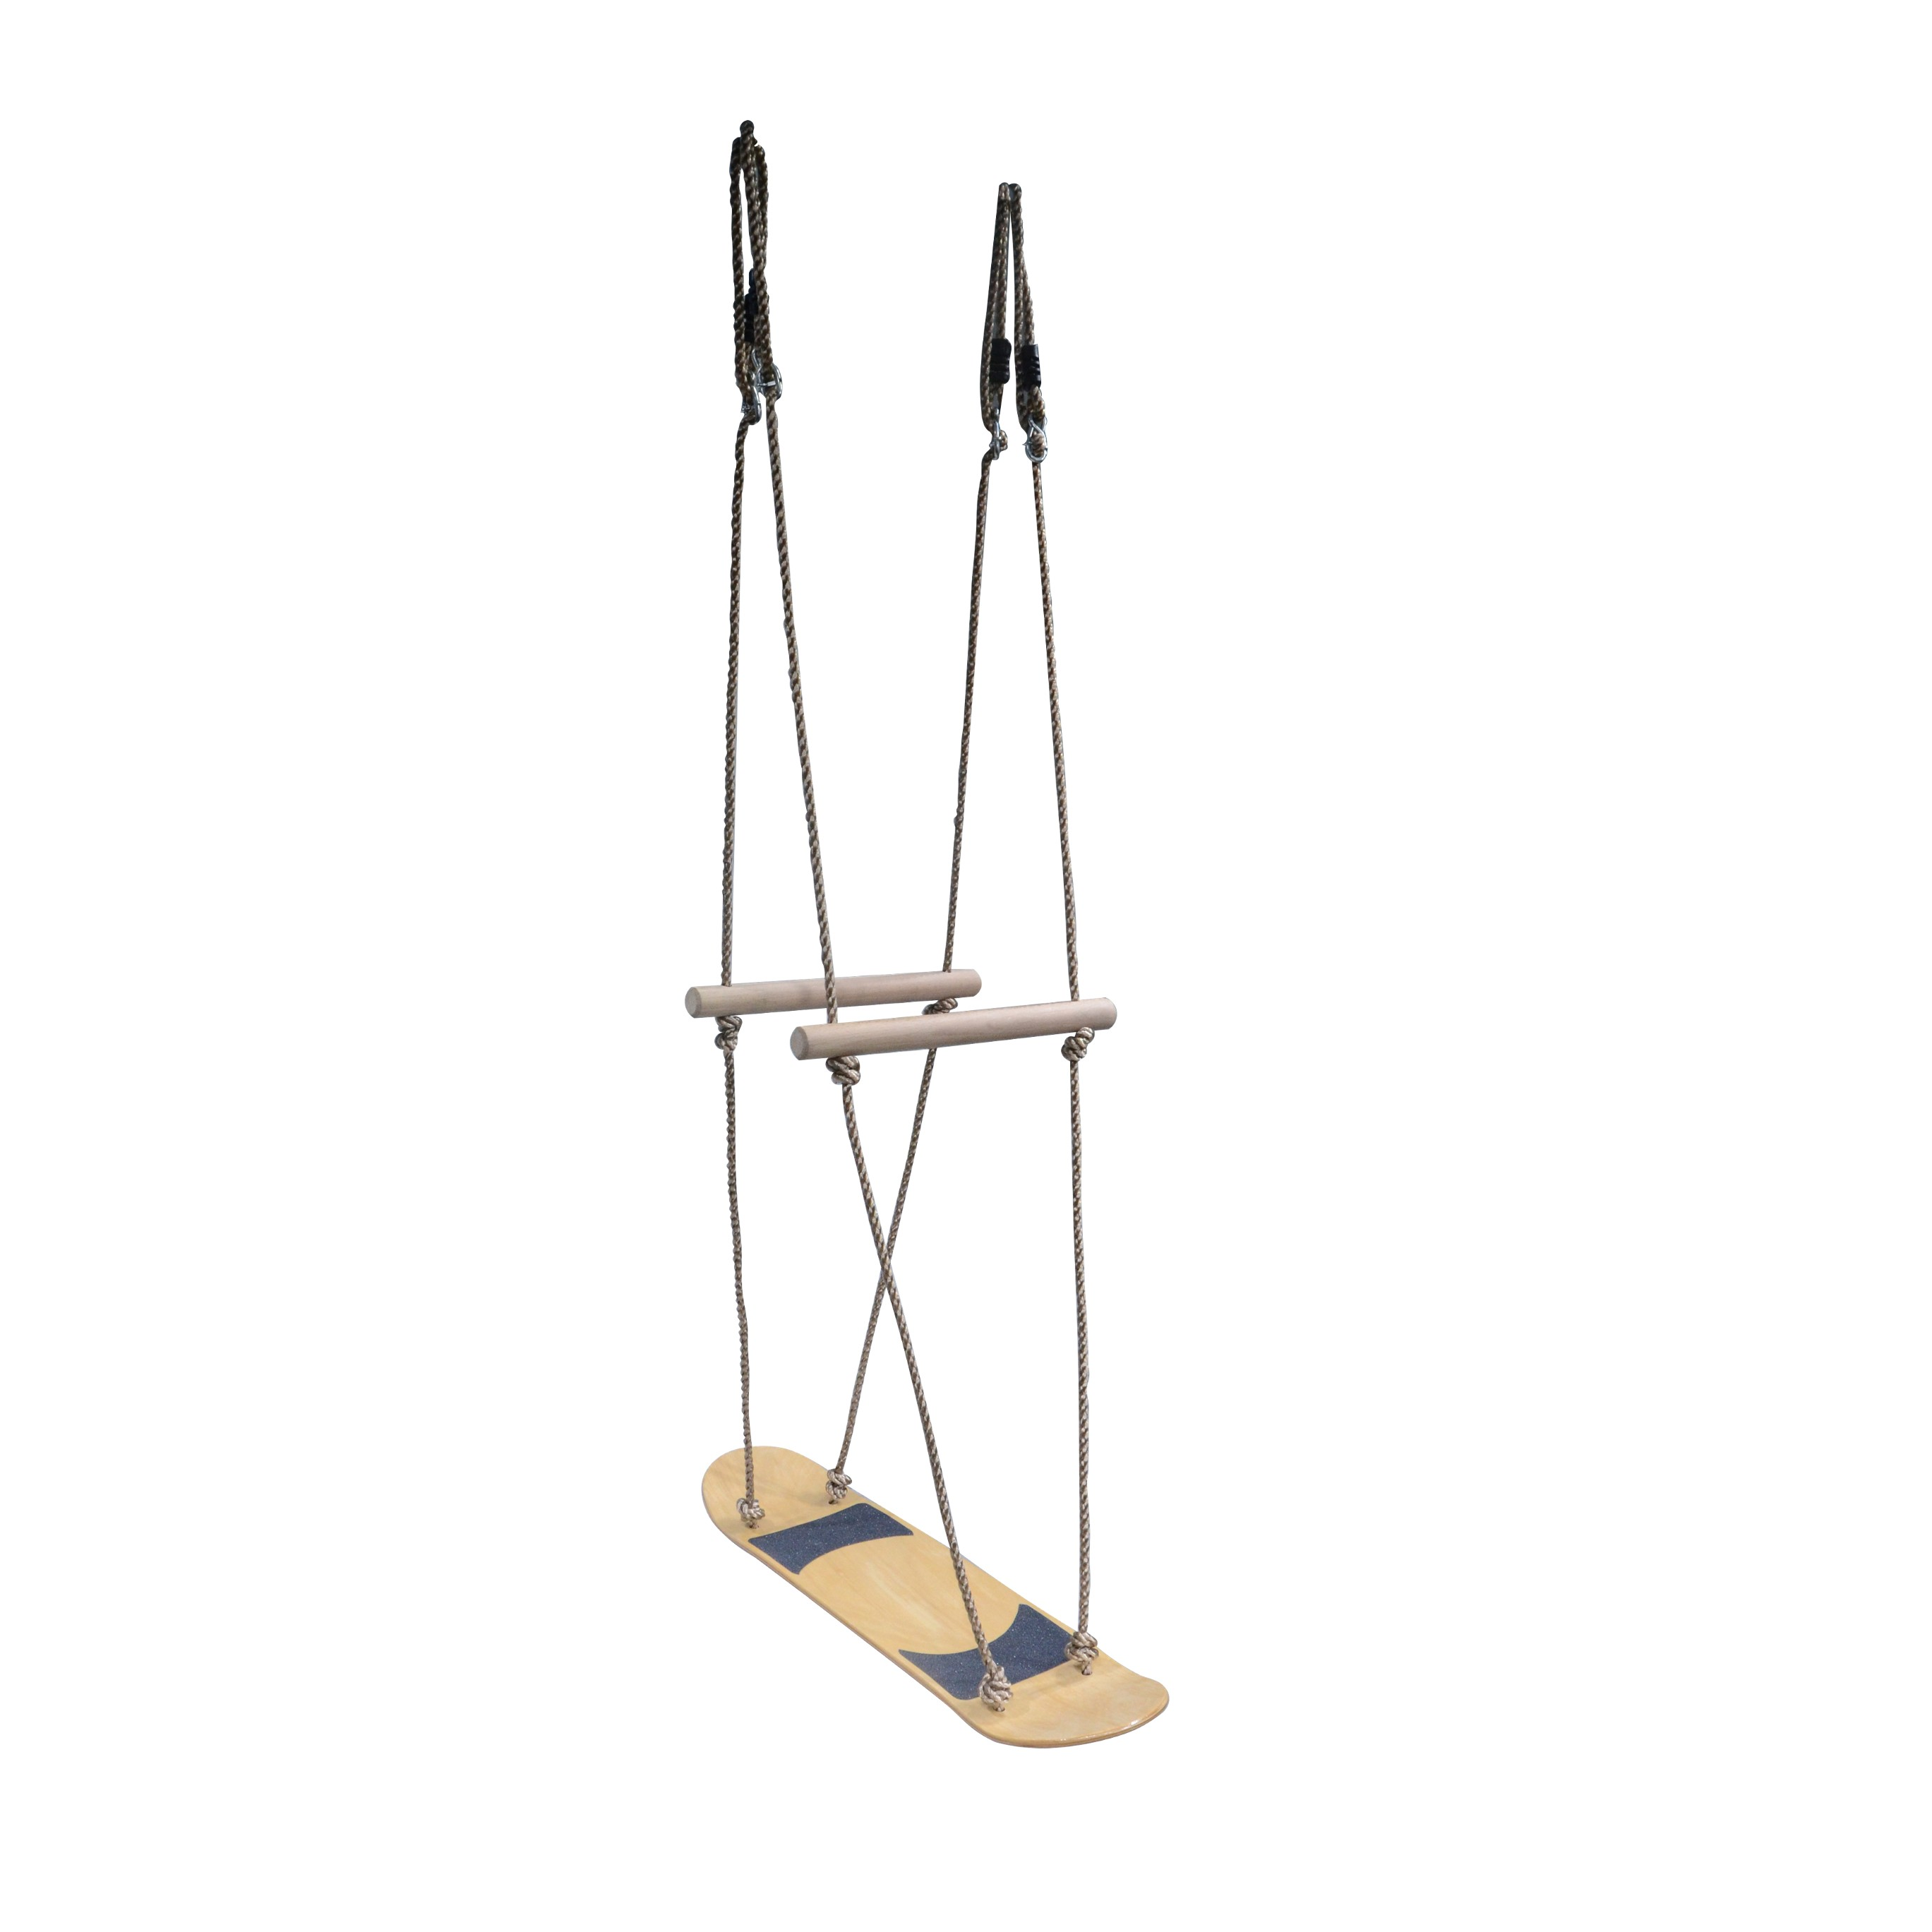 Bliss Outdoors Wooden Skateboard Swing W/ Handle Bars & Hanging Hardware, 200 lb. Capacity - image 1 of 7